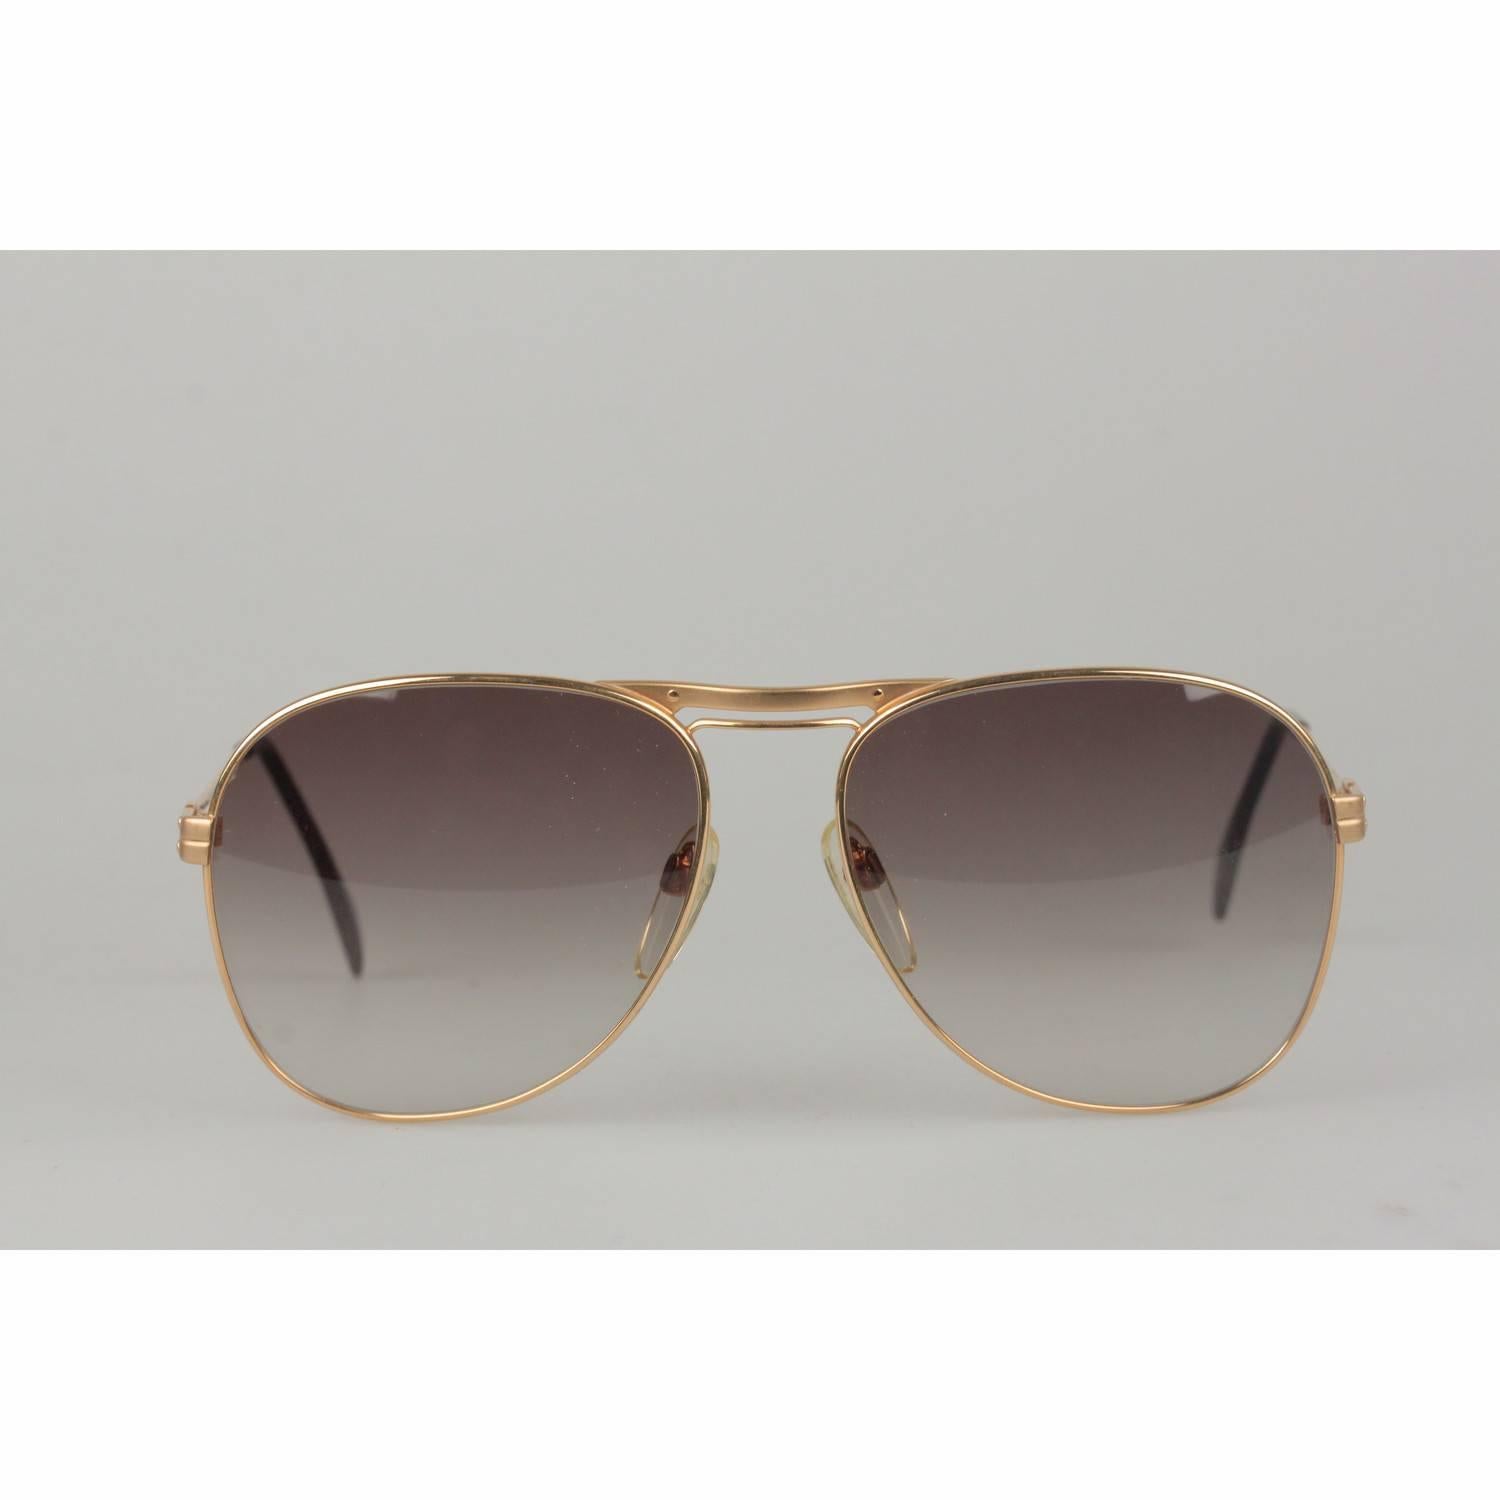 SILHOUETTE Vintage Gold Metal Sunglasses M7019 58-16mm New Old Stock 4